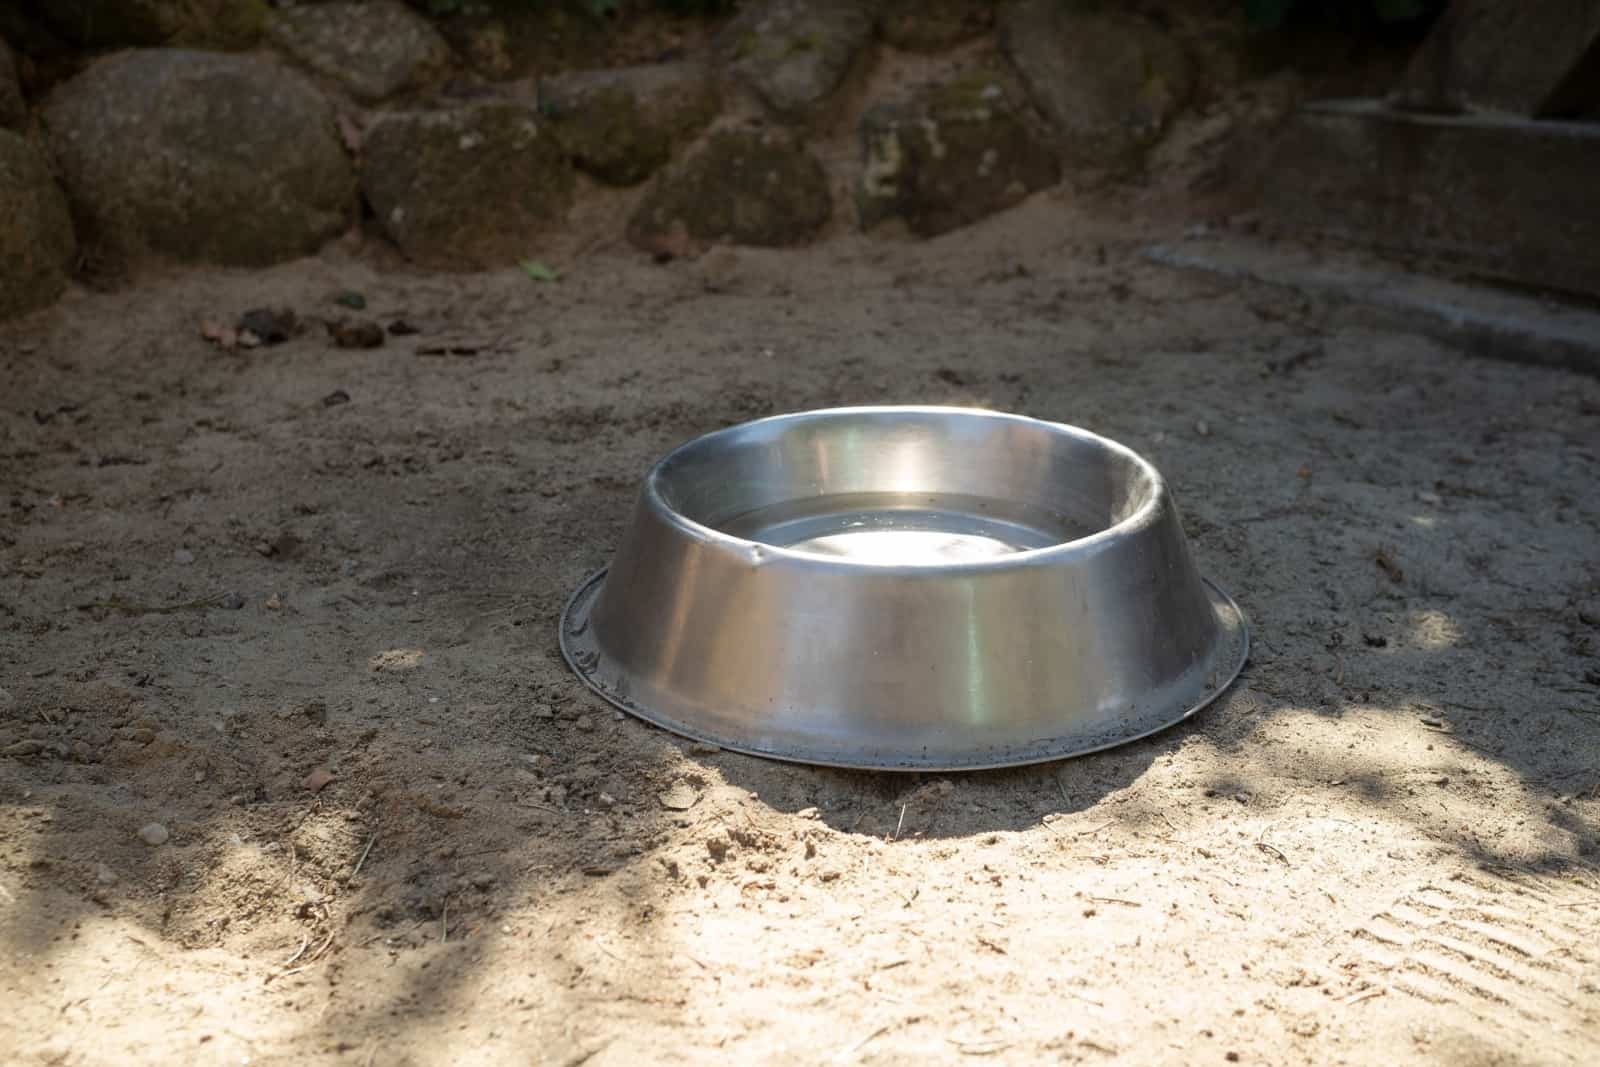 dog bowl of water in a public place